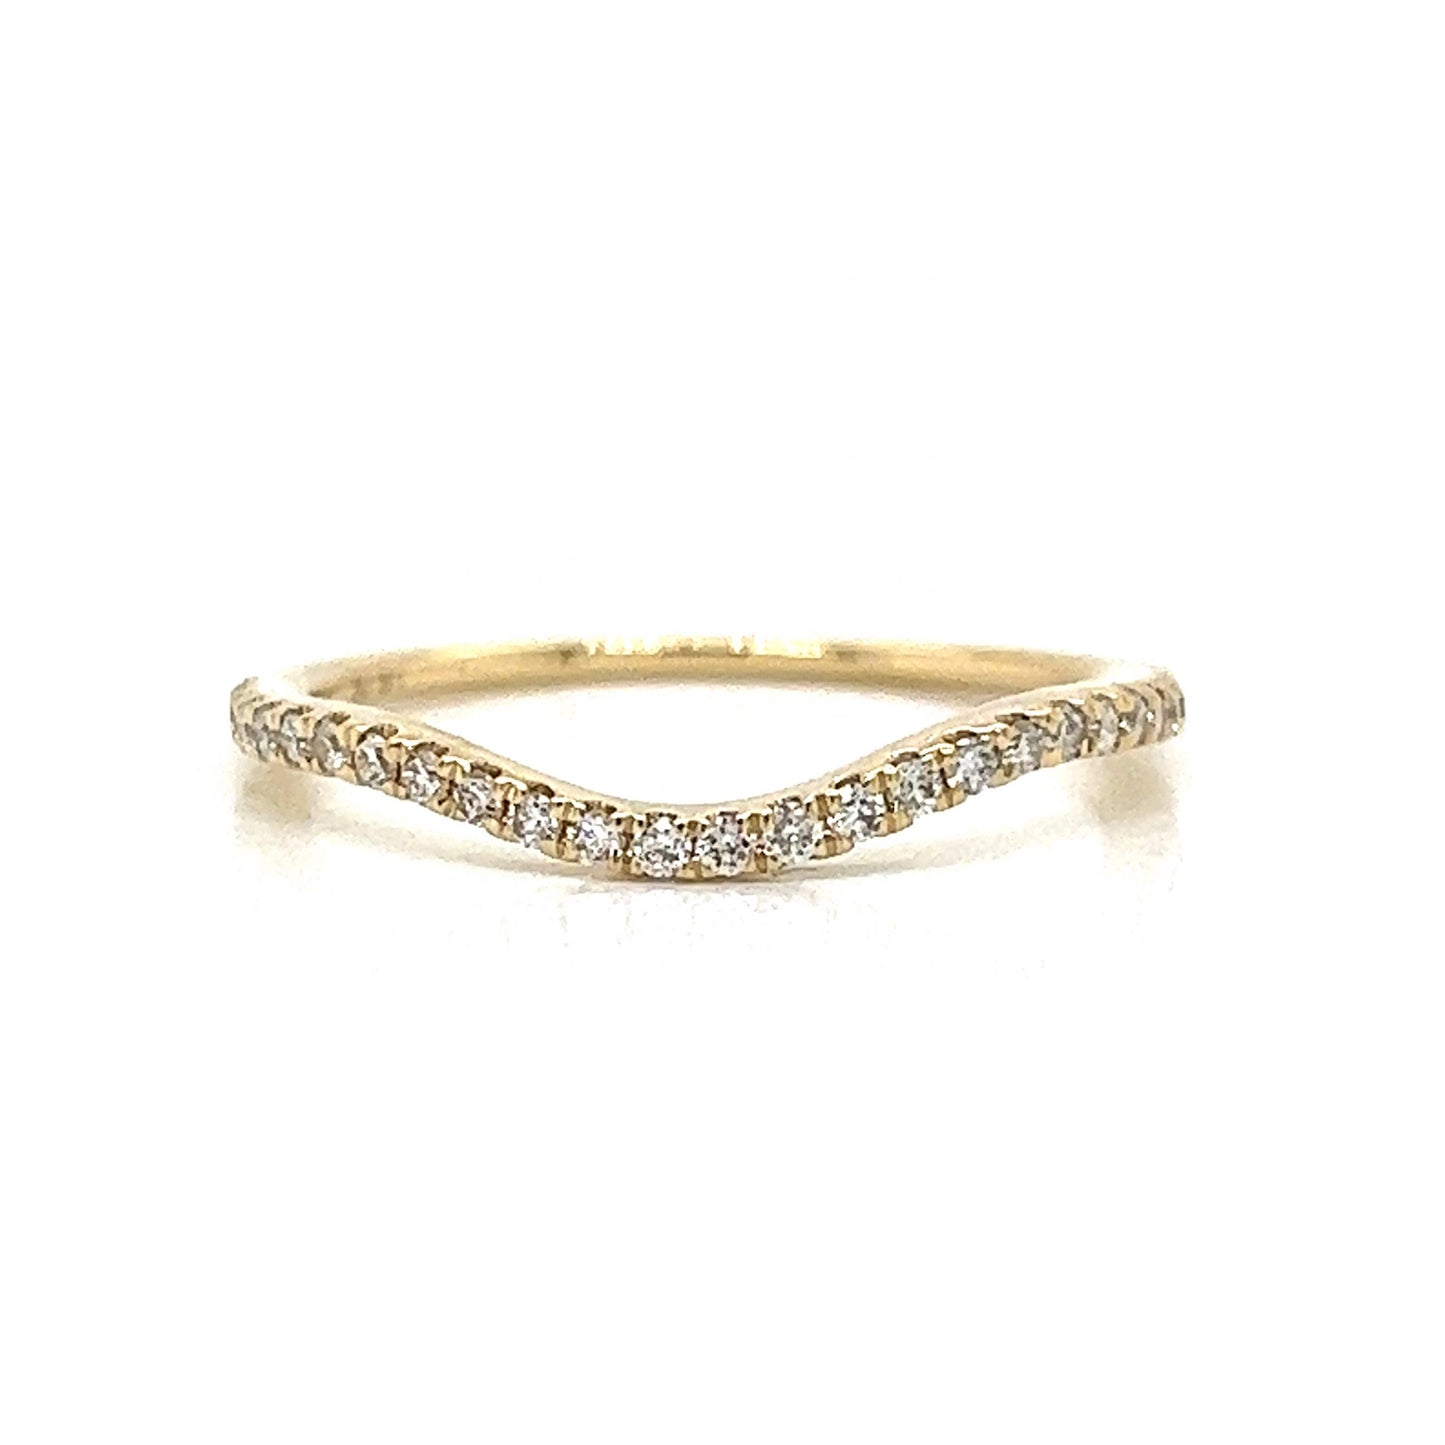 .18 Curved Diamond Wedding Band in Yellow Gold